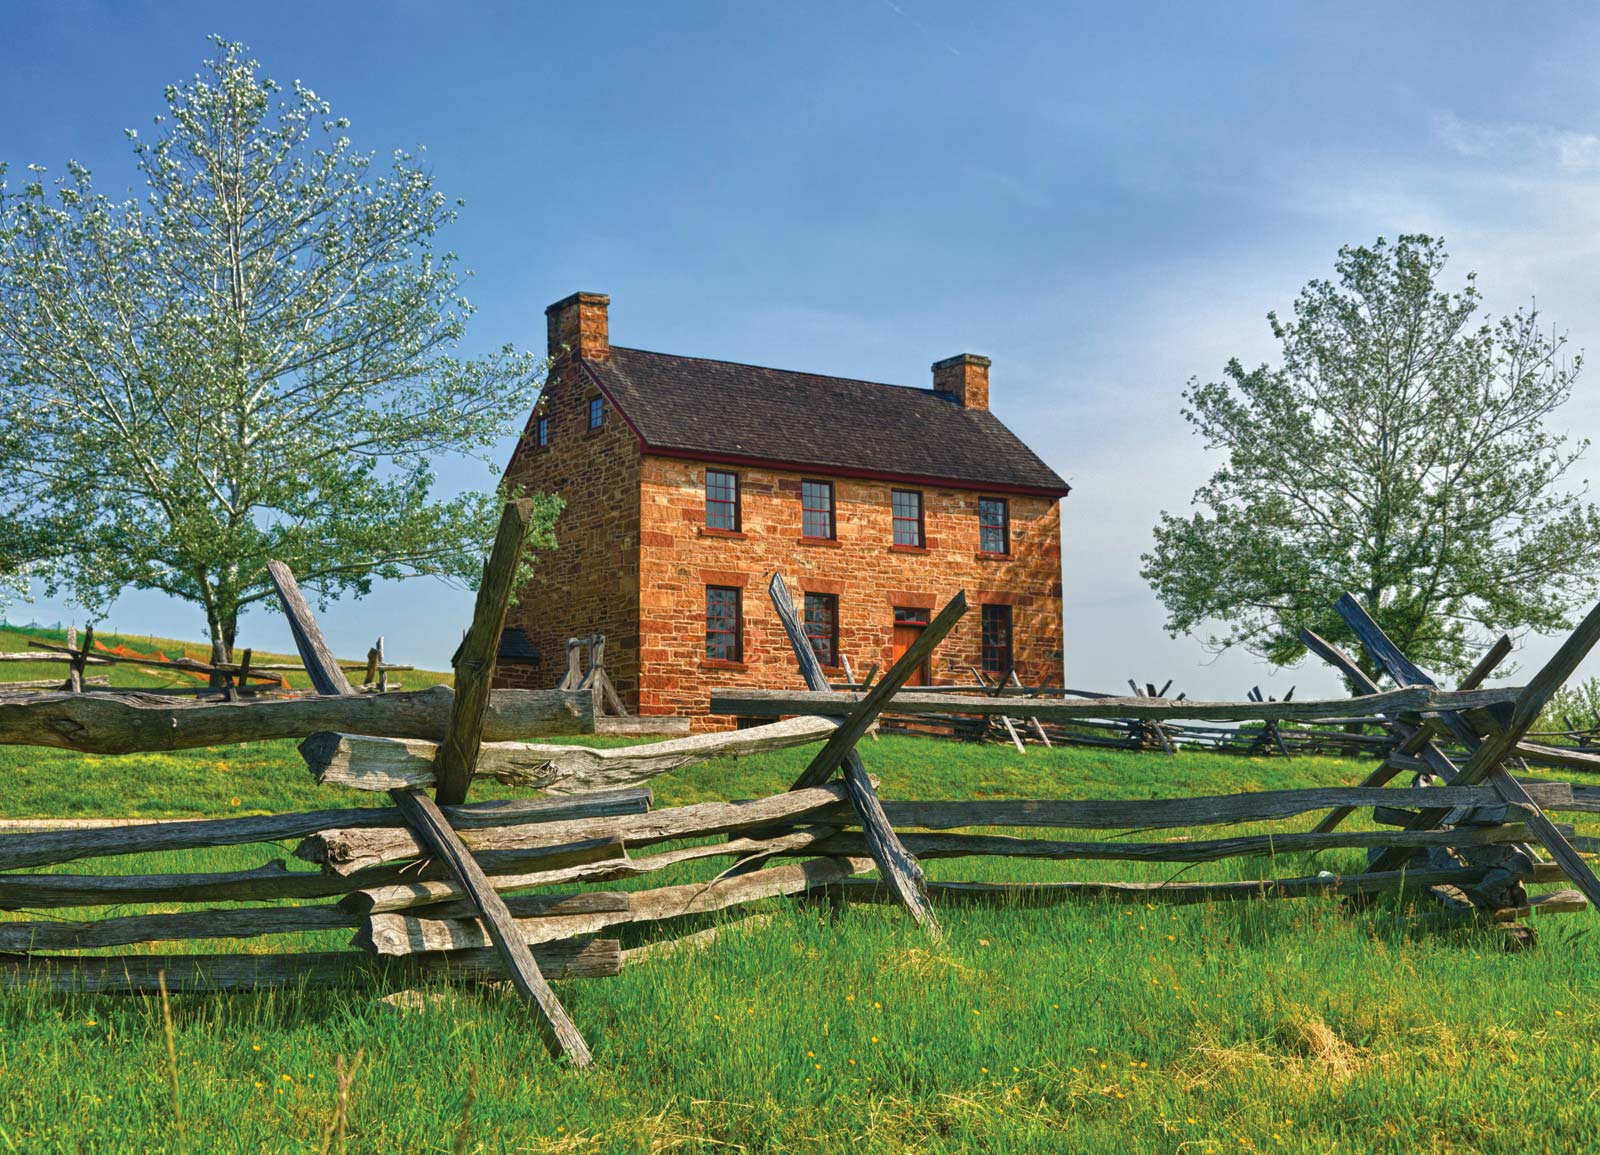 The Ghosts of the Manassas Stone House